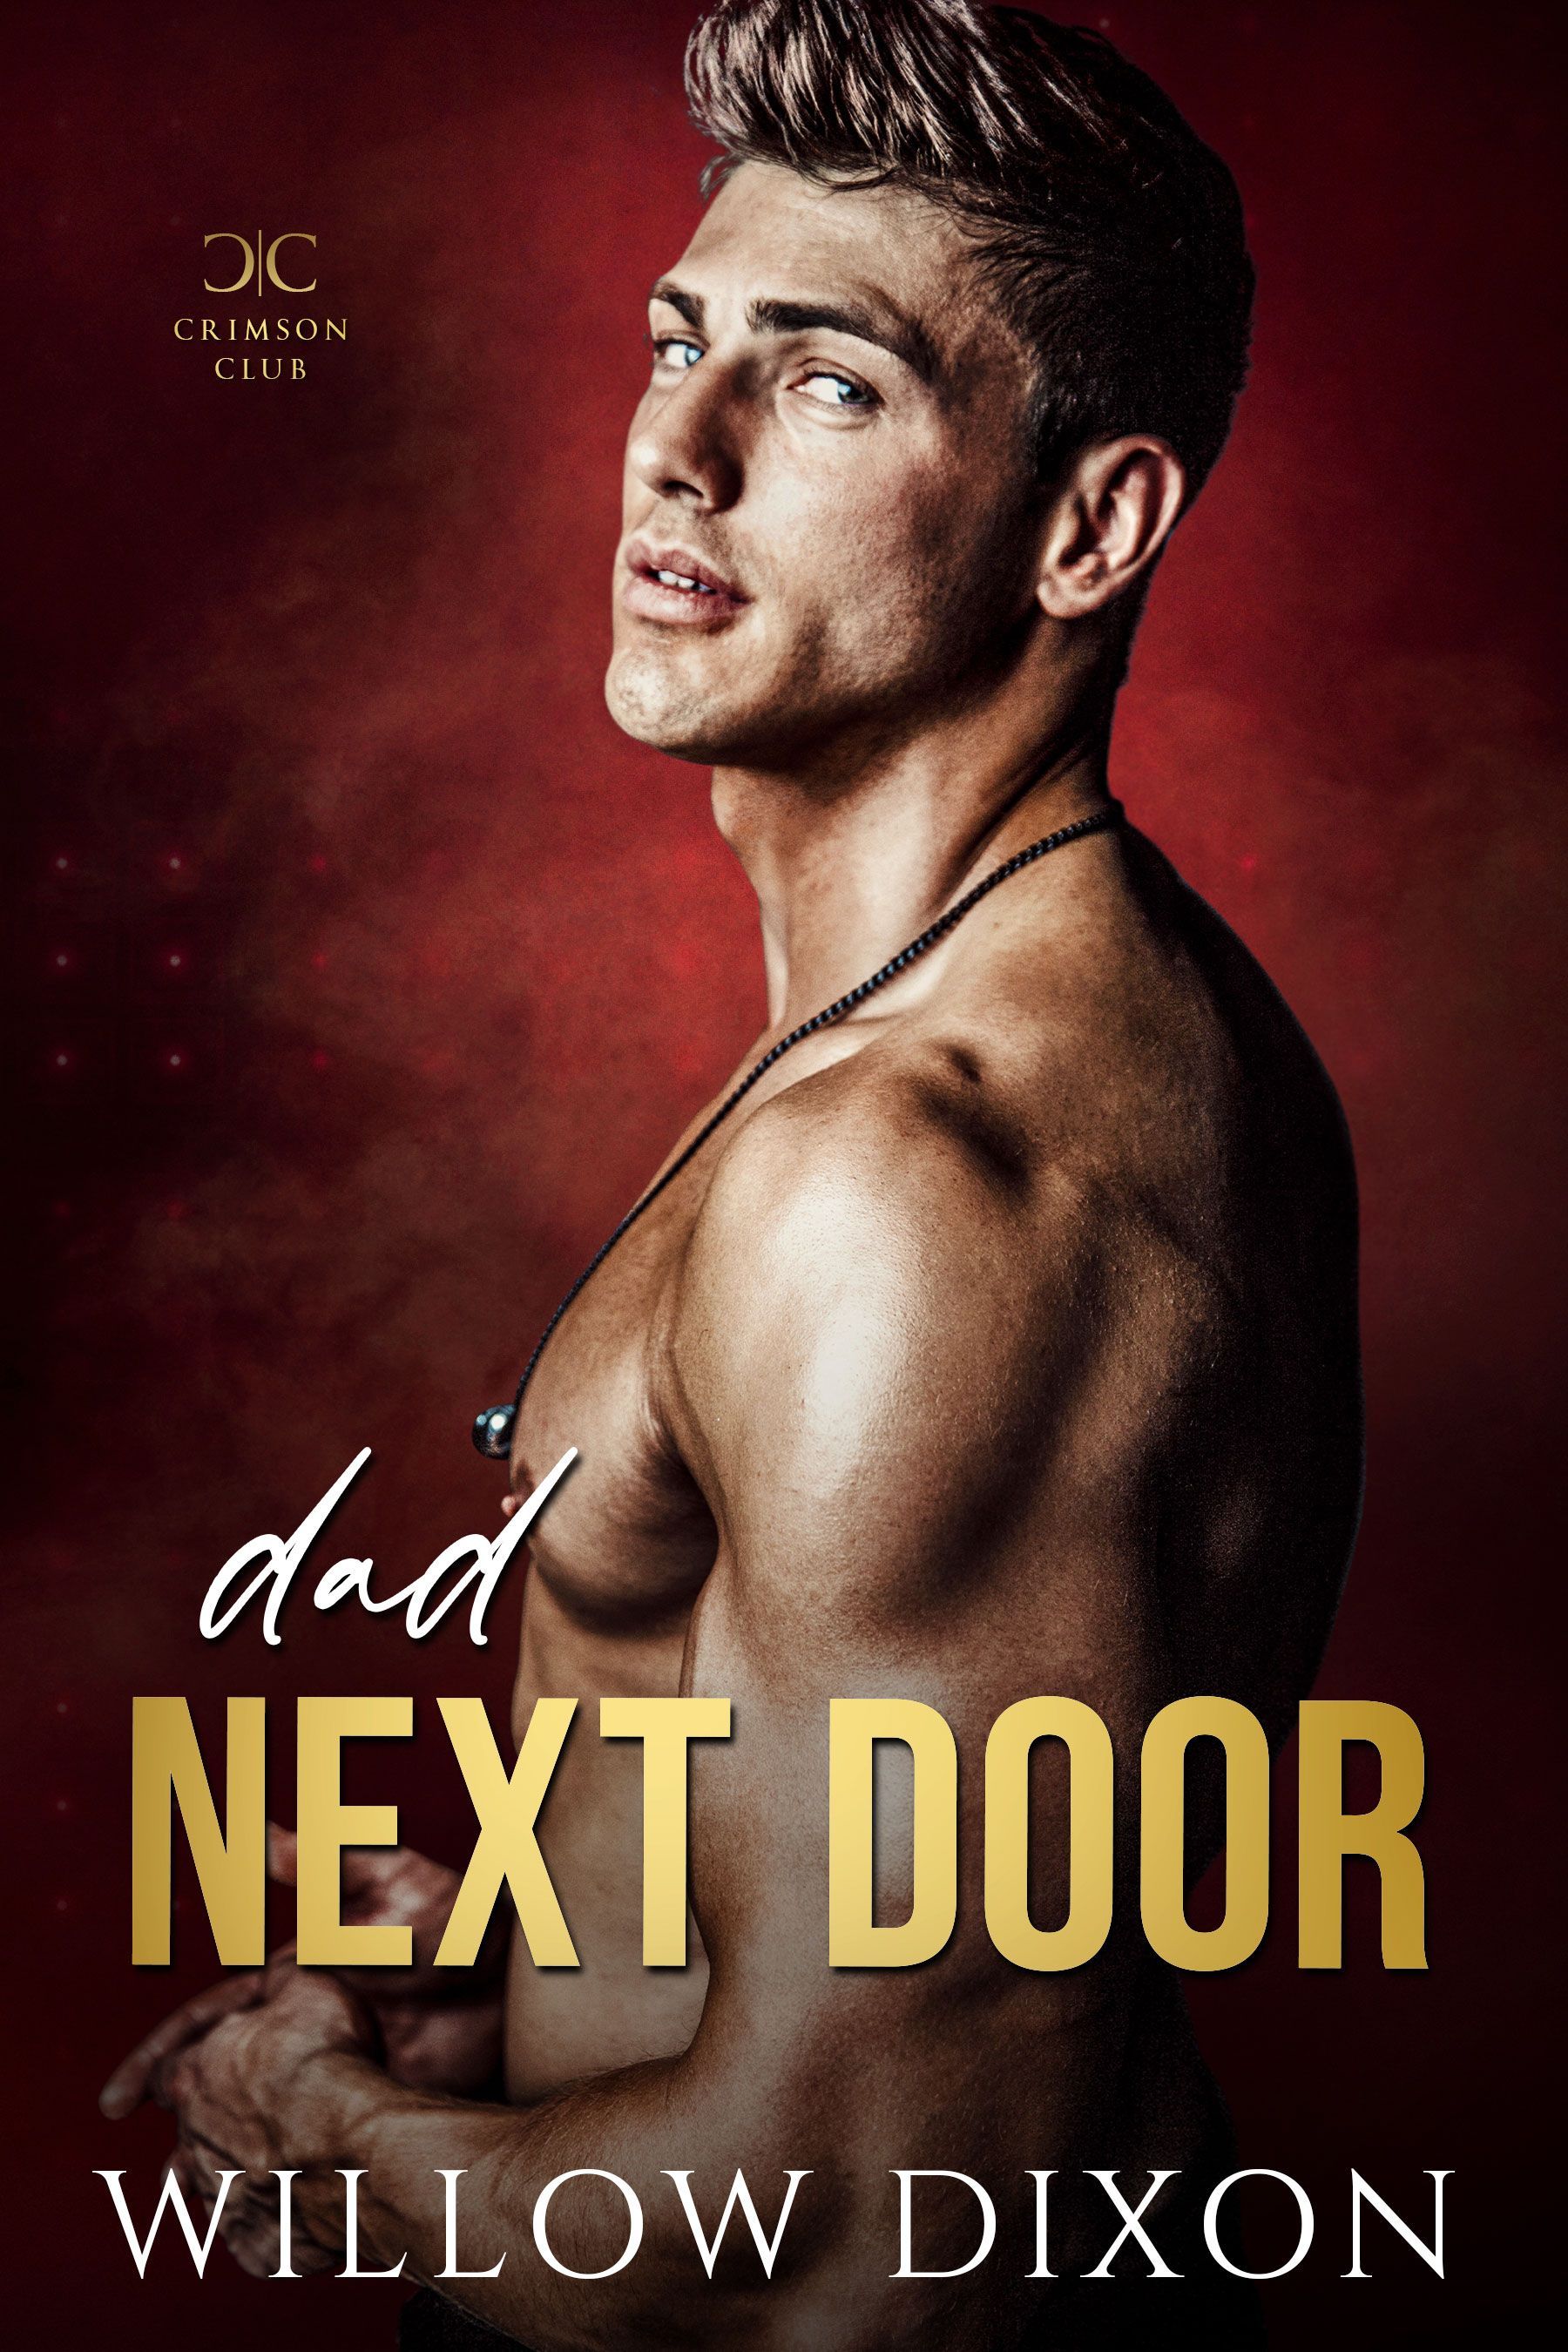 A shirtless man is on the cover of a book called dad next door by willow dixon.